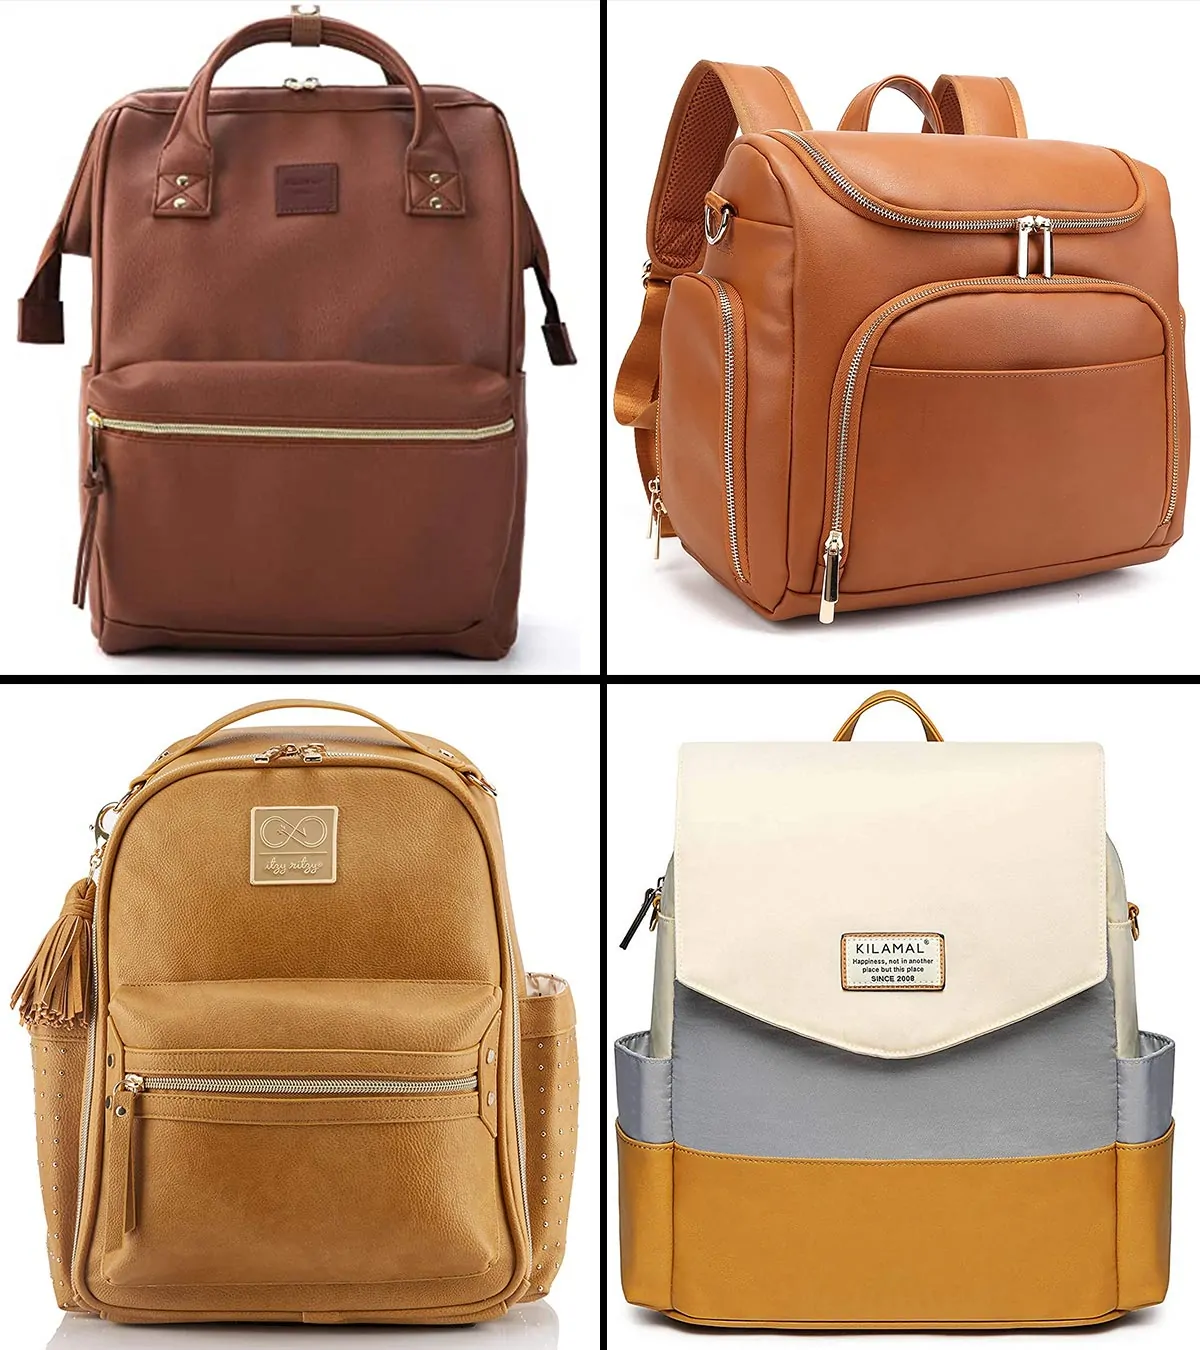 13 Best Leather Diaper Bags in 2021